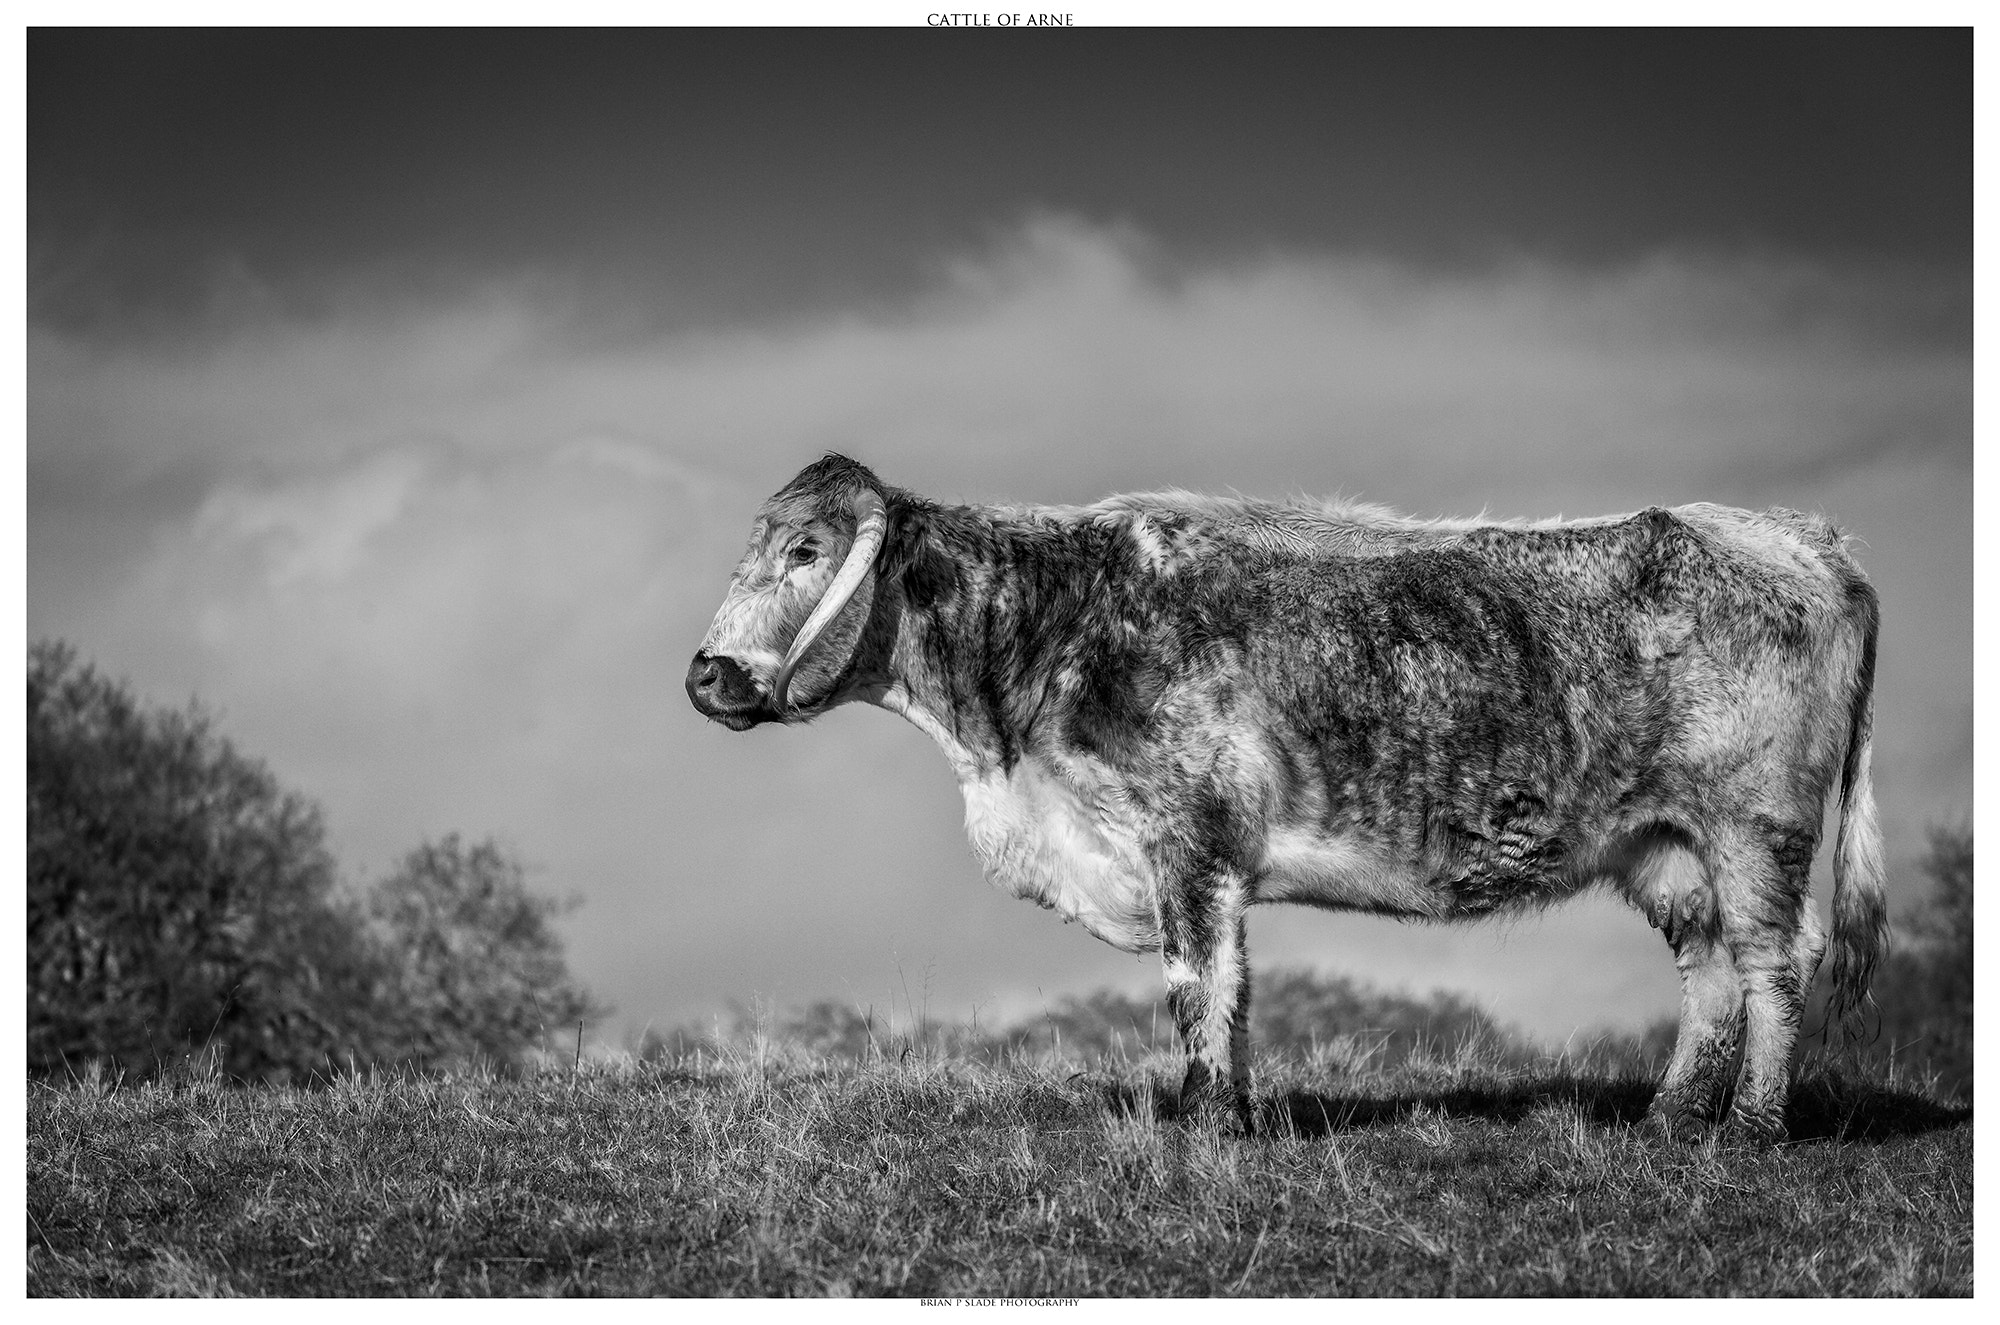 Canon EOS 5D Mark II + Sigma 150-600mm F5-6.3 DG OS HSM | C sample photo. Cattle of arne photography